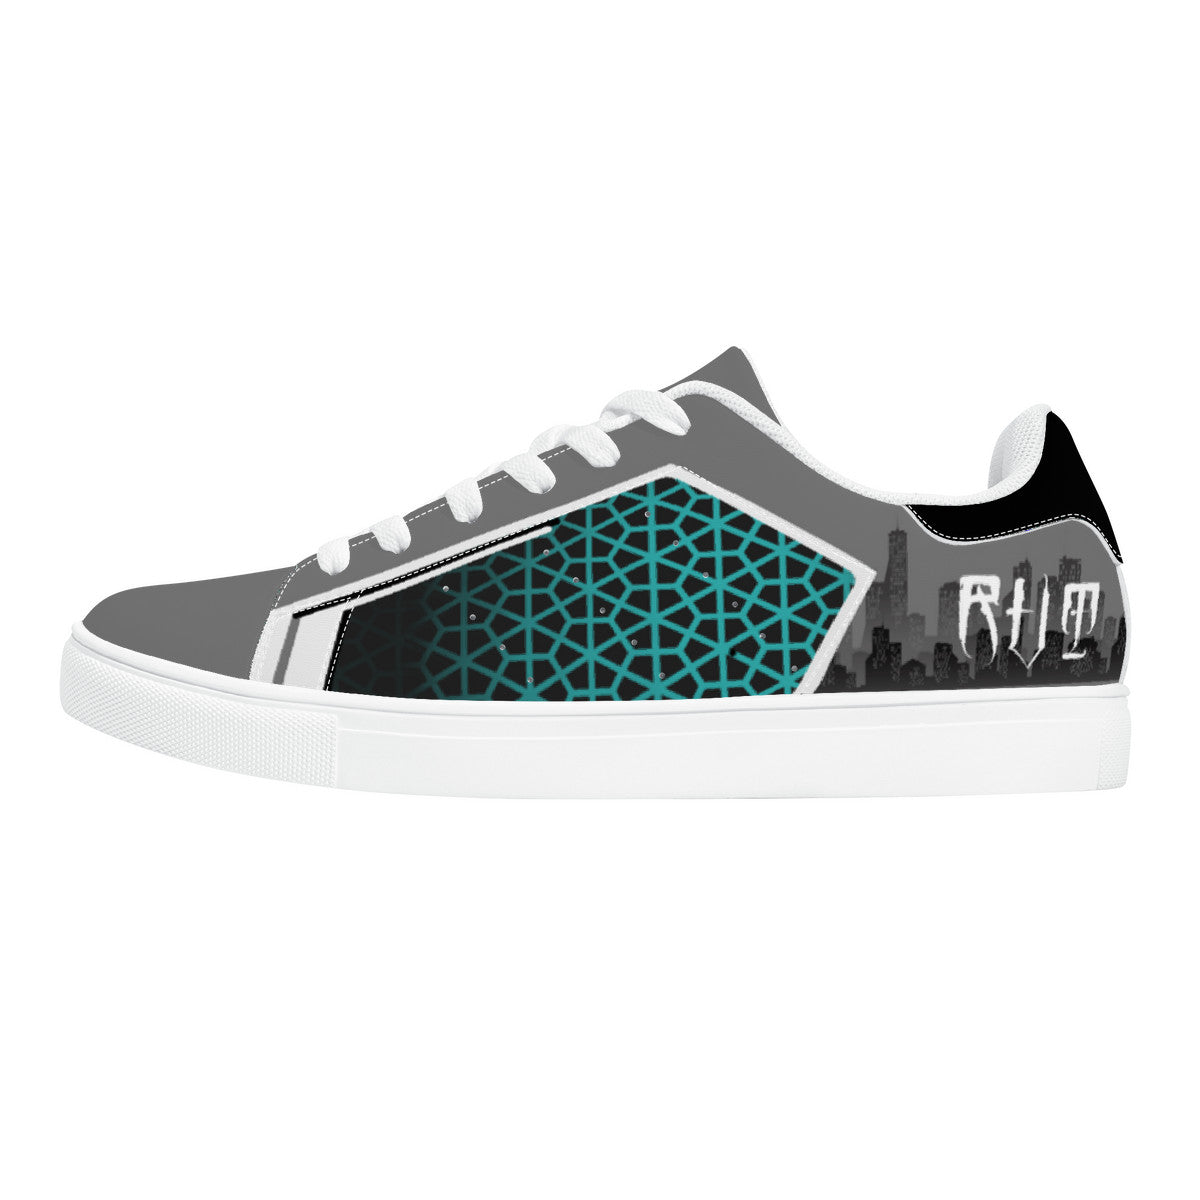 RVT Low-Top Synthetic Leather Sneakers - Skyline Blue Geometric